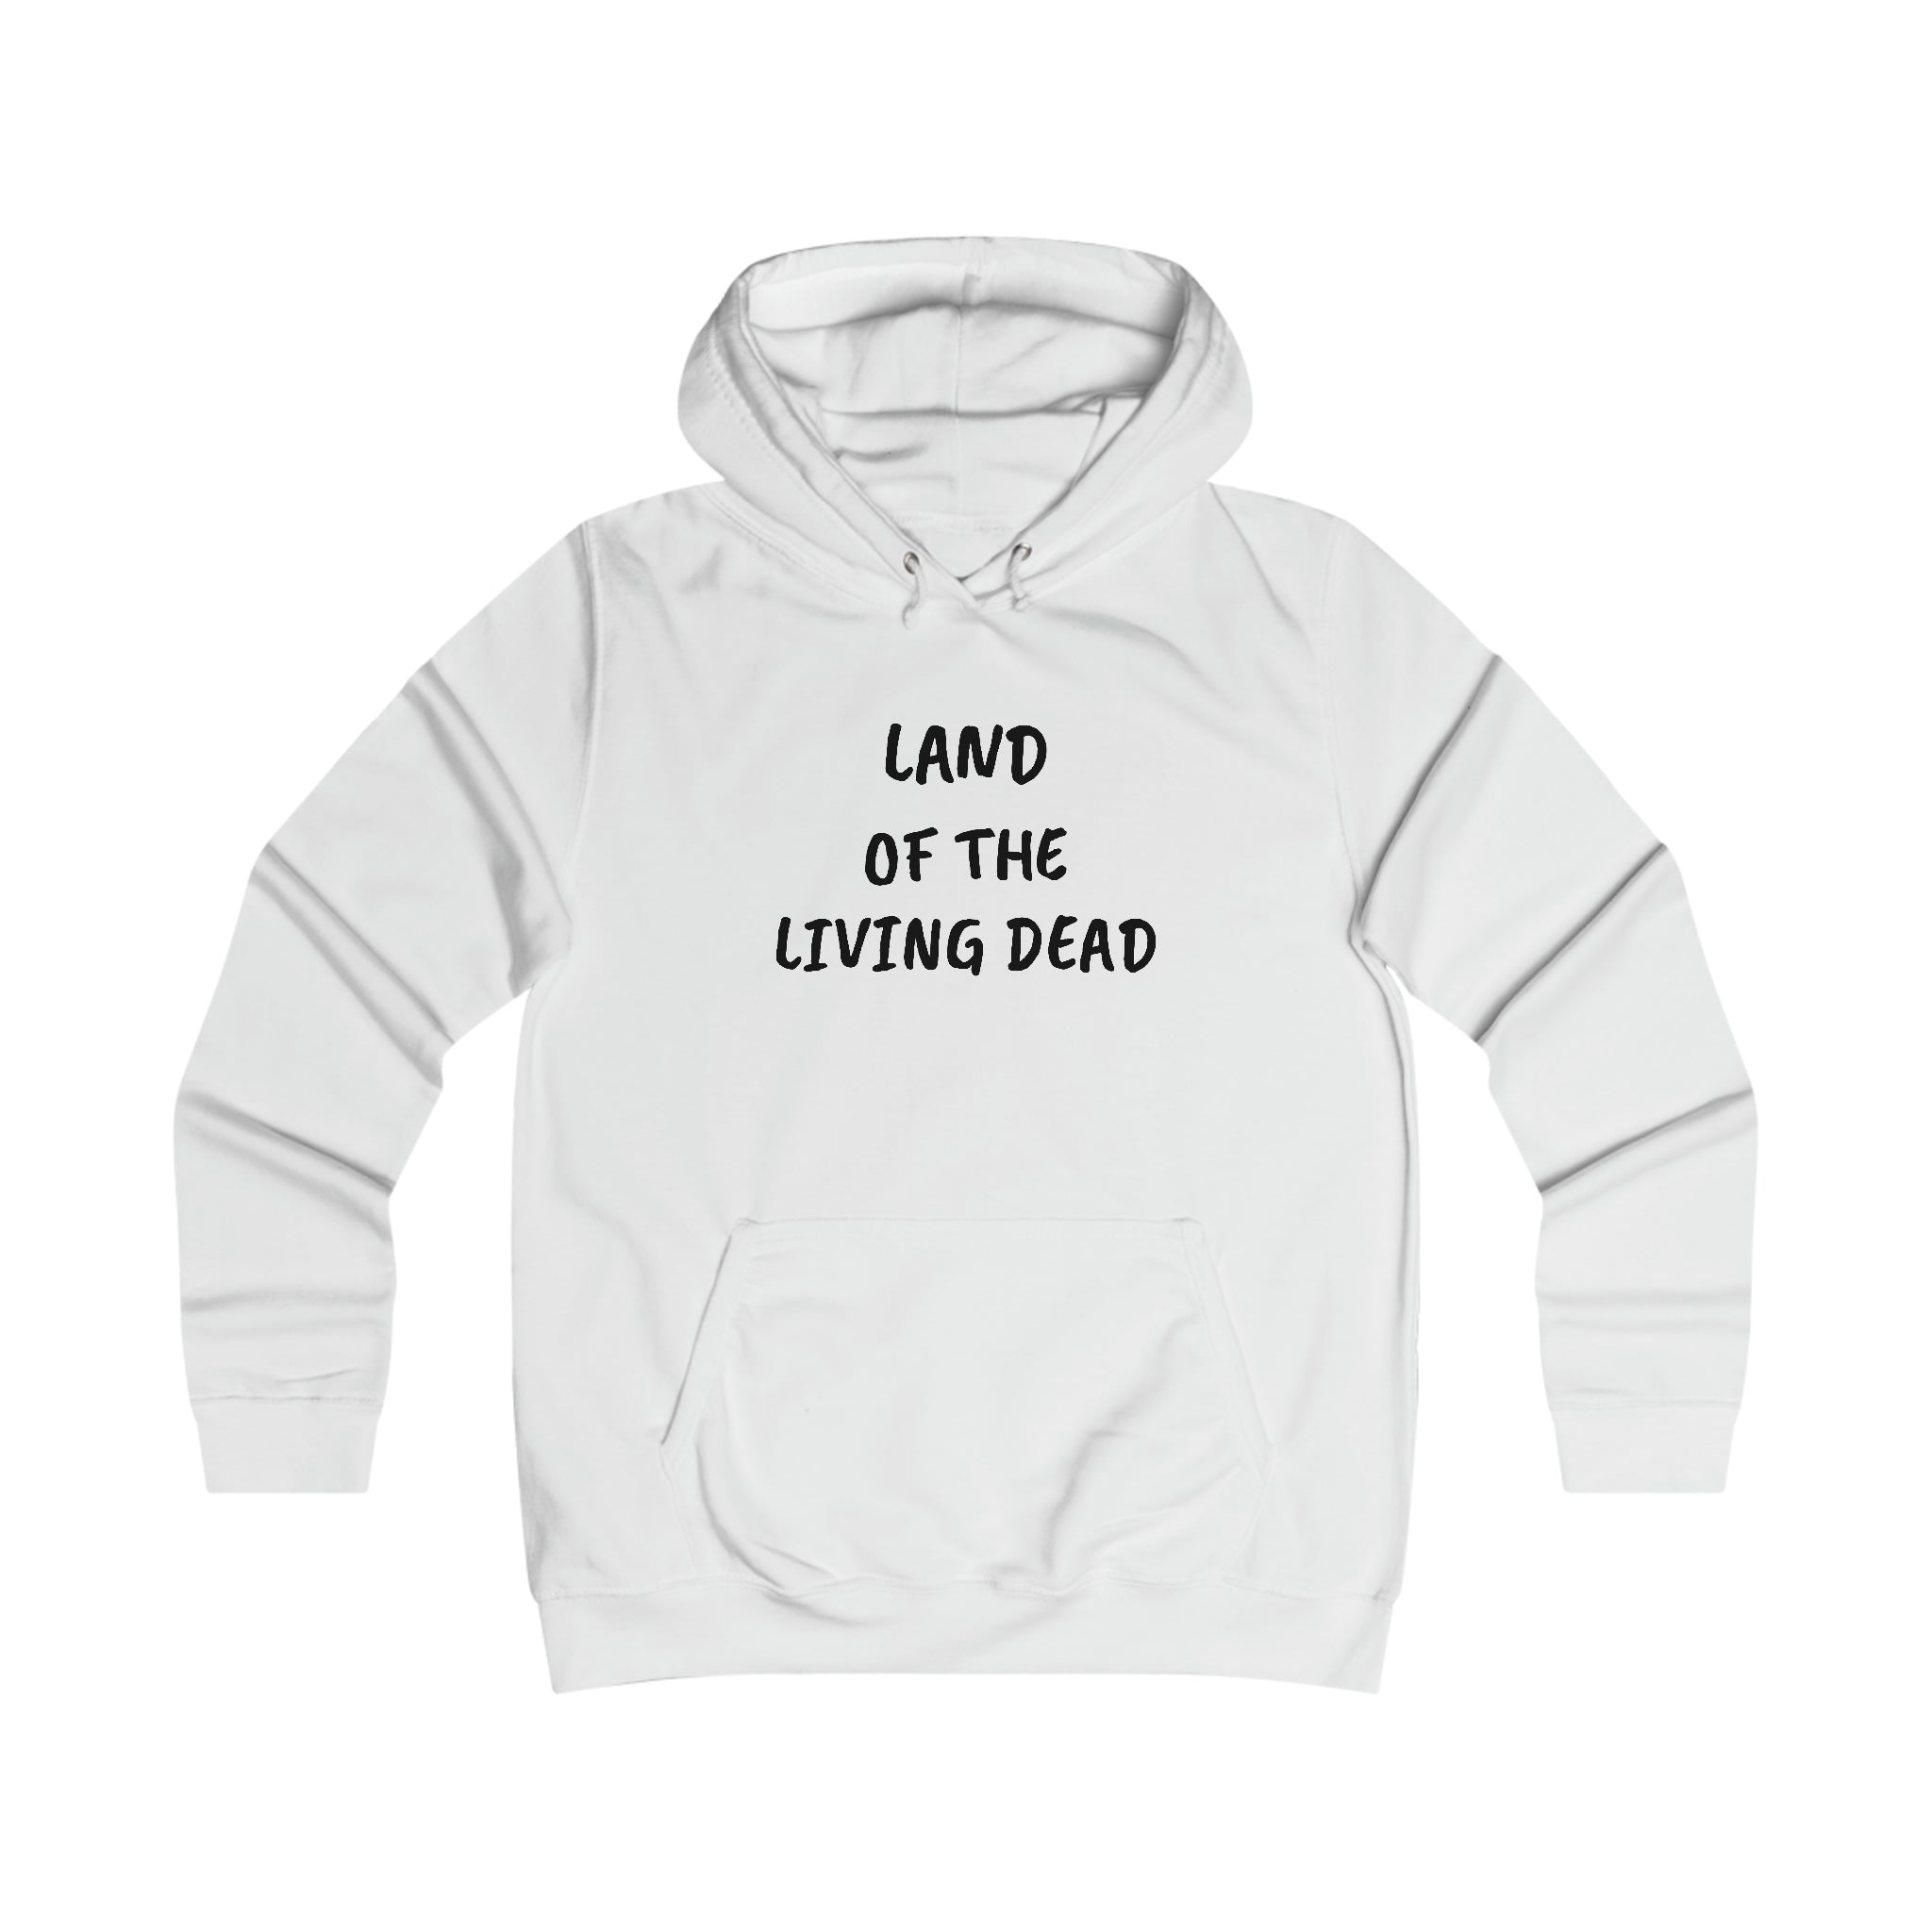 4019 LAND OF THE LIVING DEAD